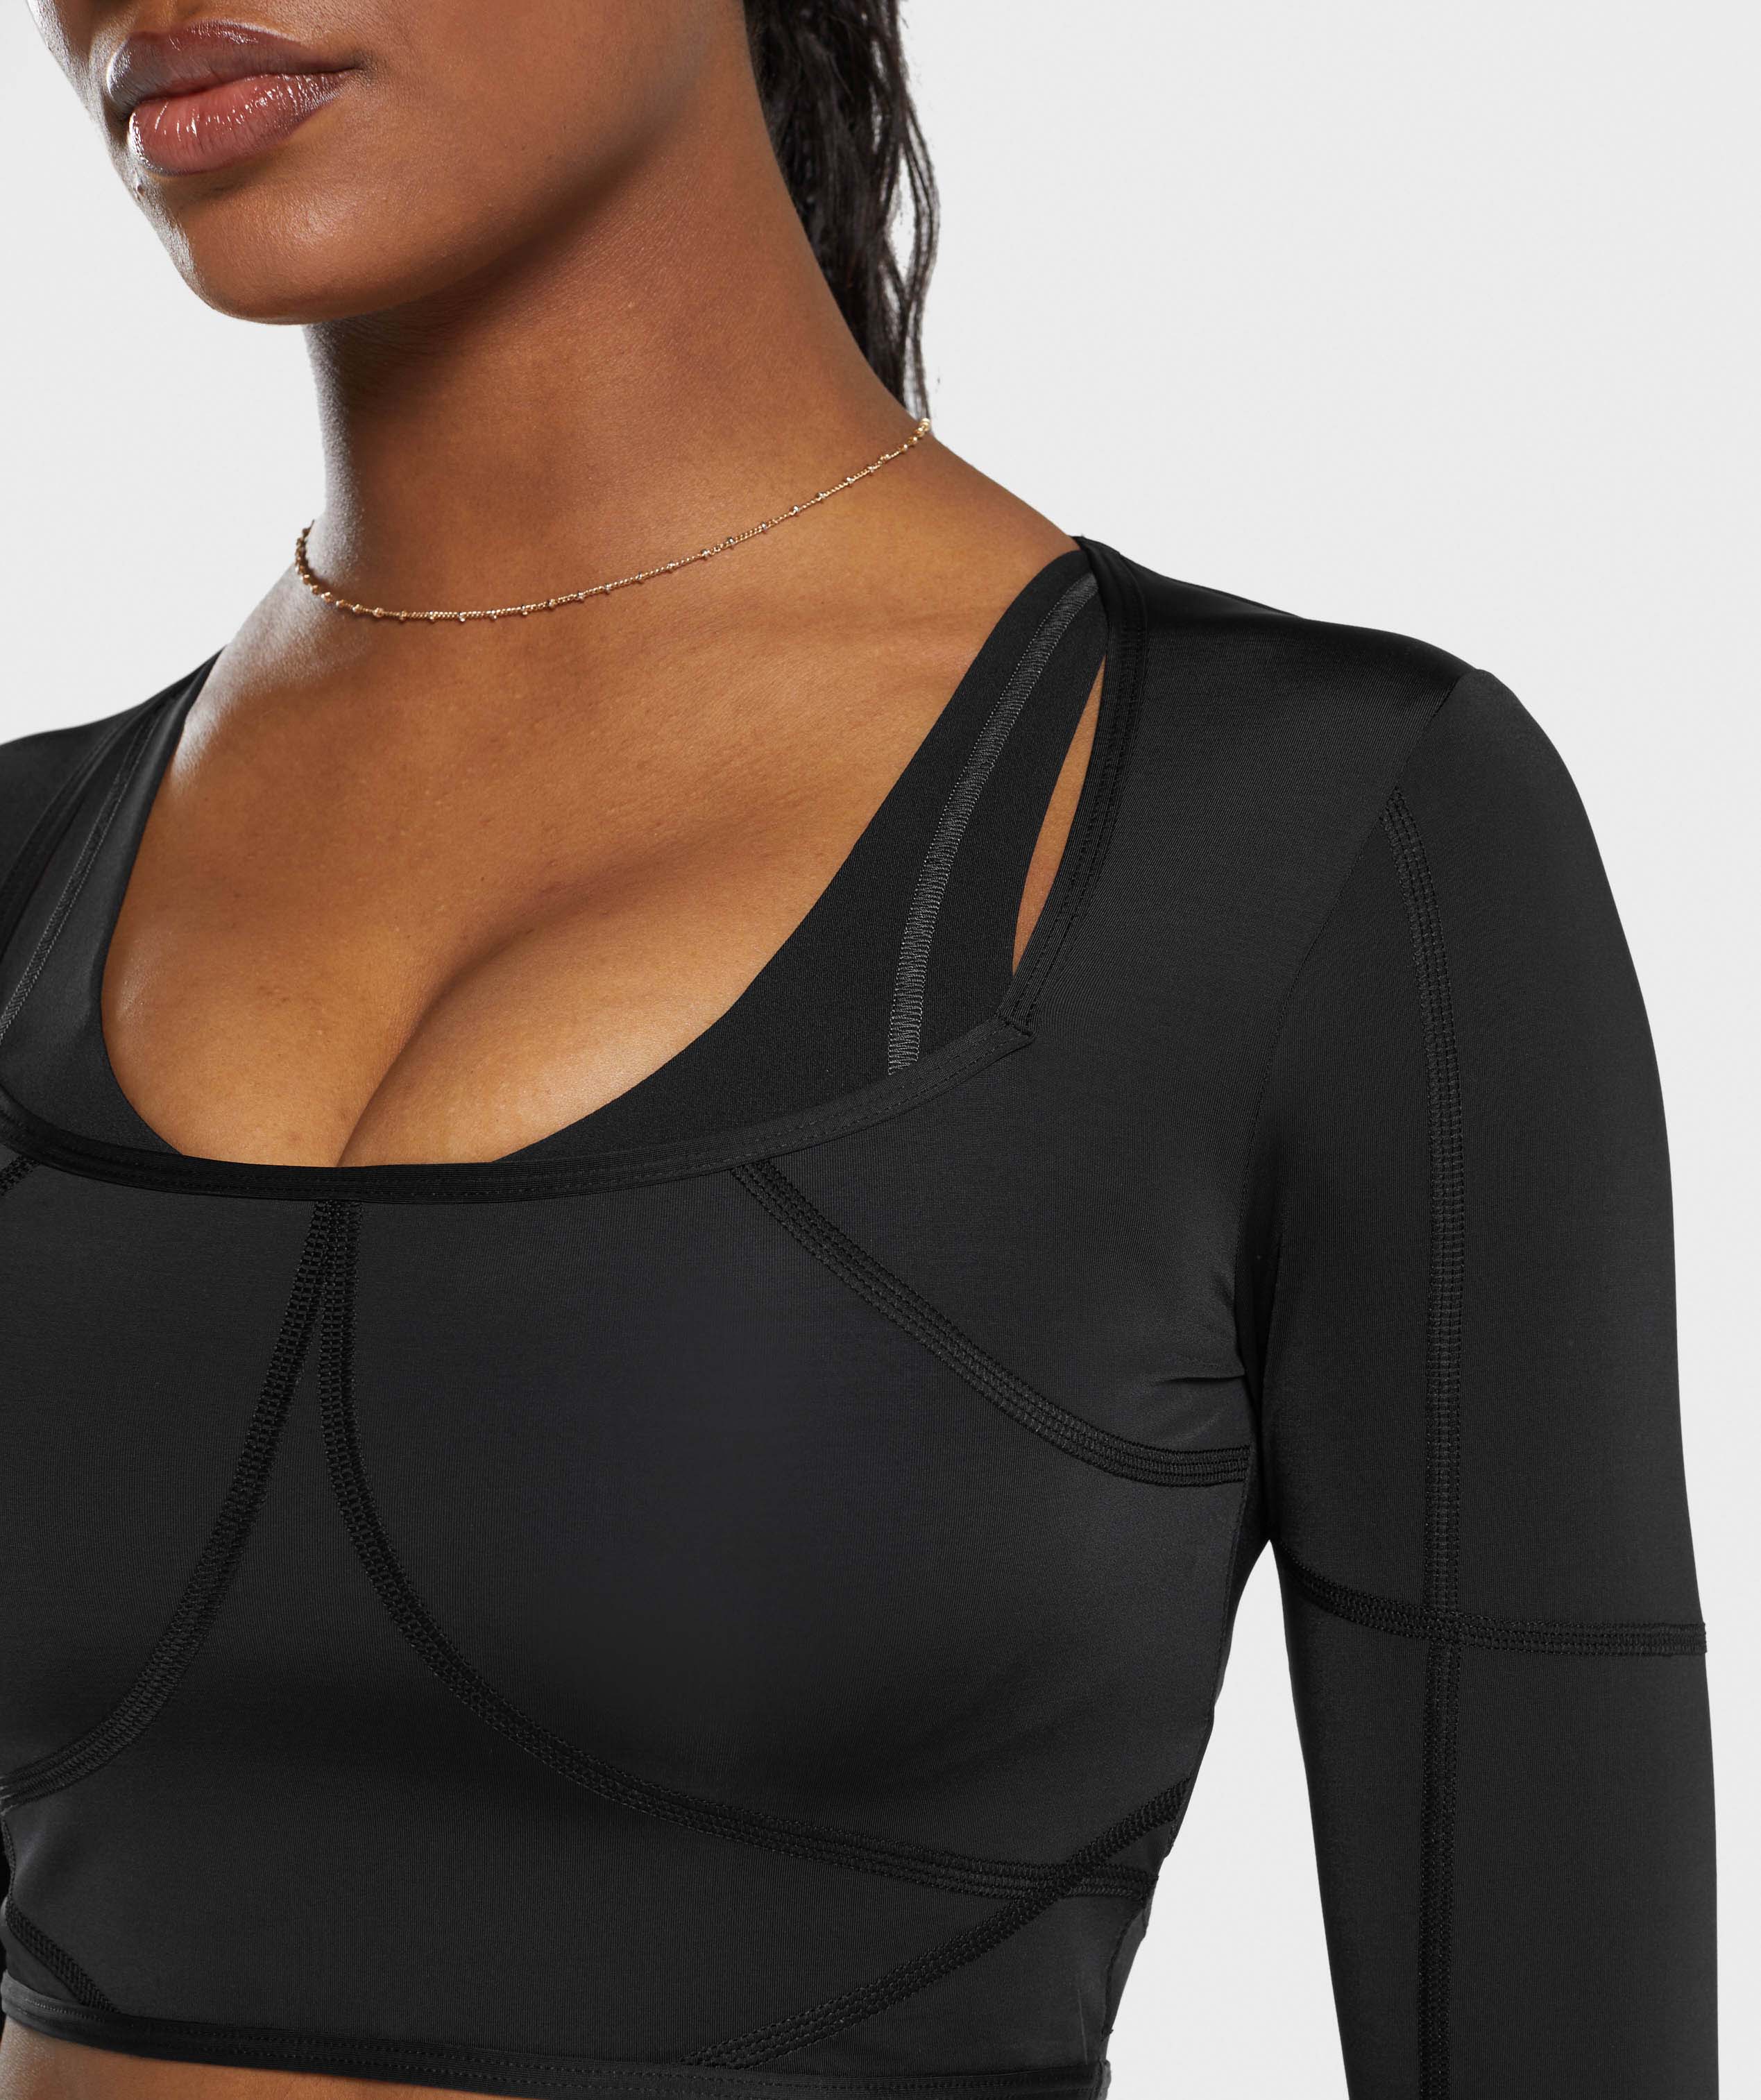 Stitch Feature Long Sleeve Crop Top in Black/Stock Black Marl - view 5